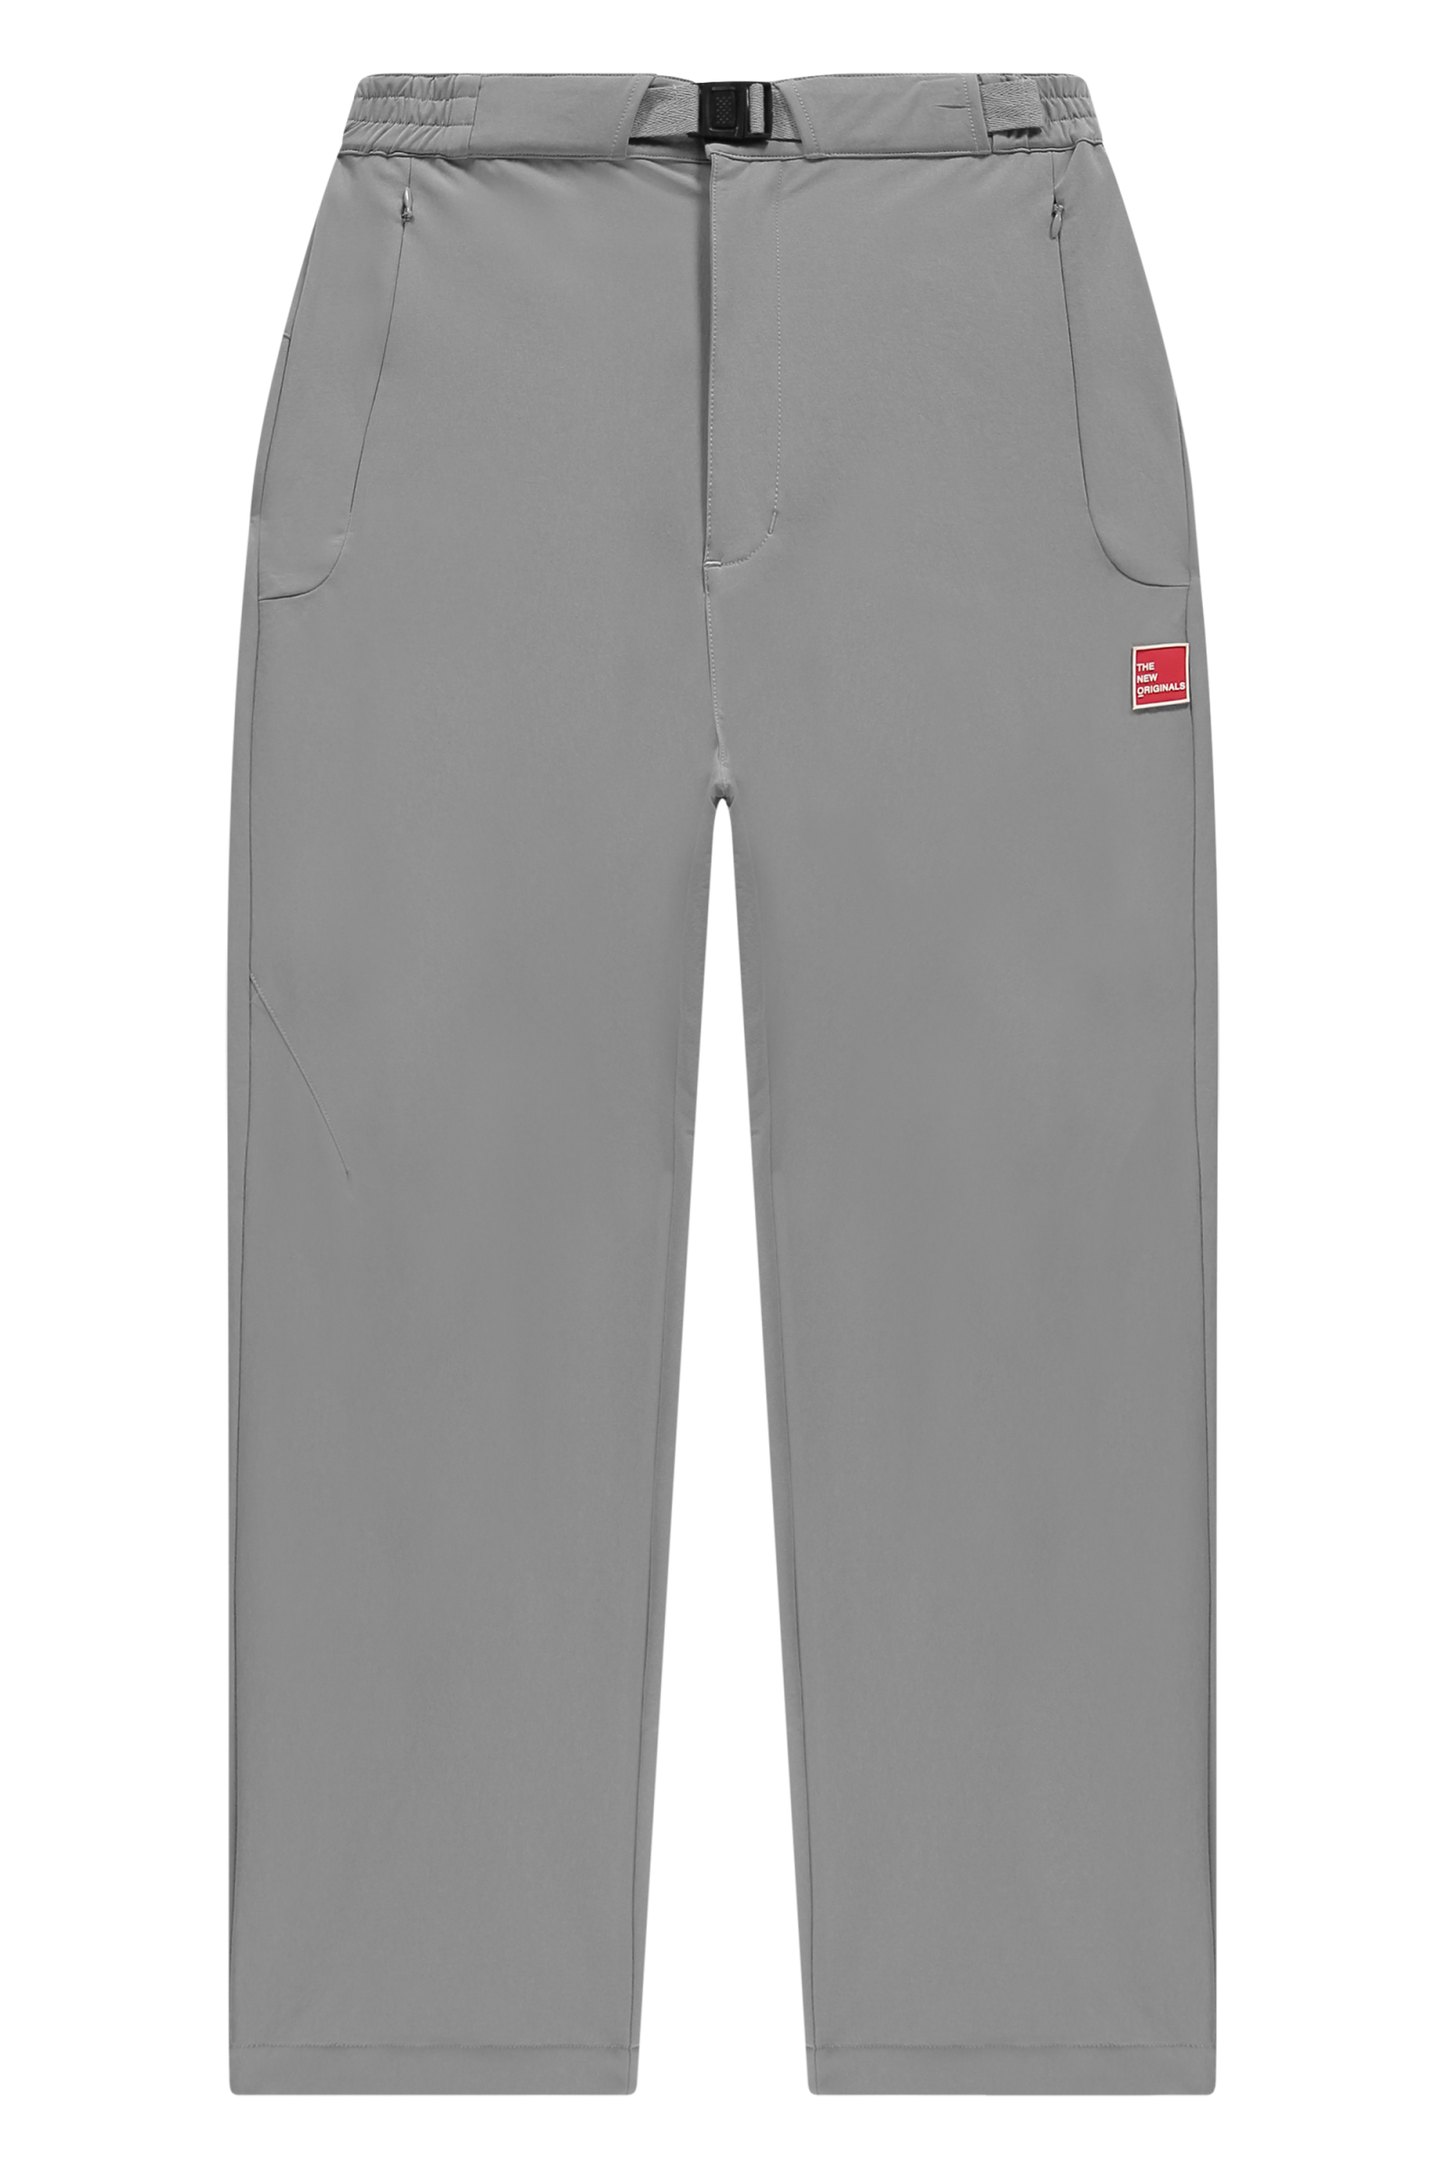 The New Originals 9-Dots Relaxed Tech Pants - Quarry